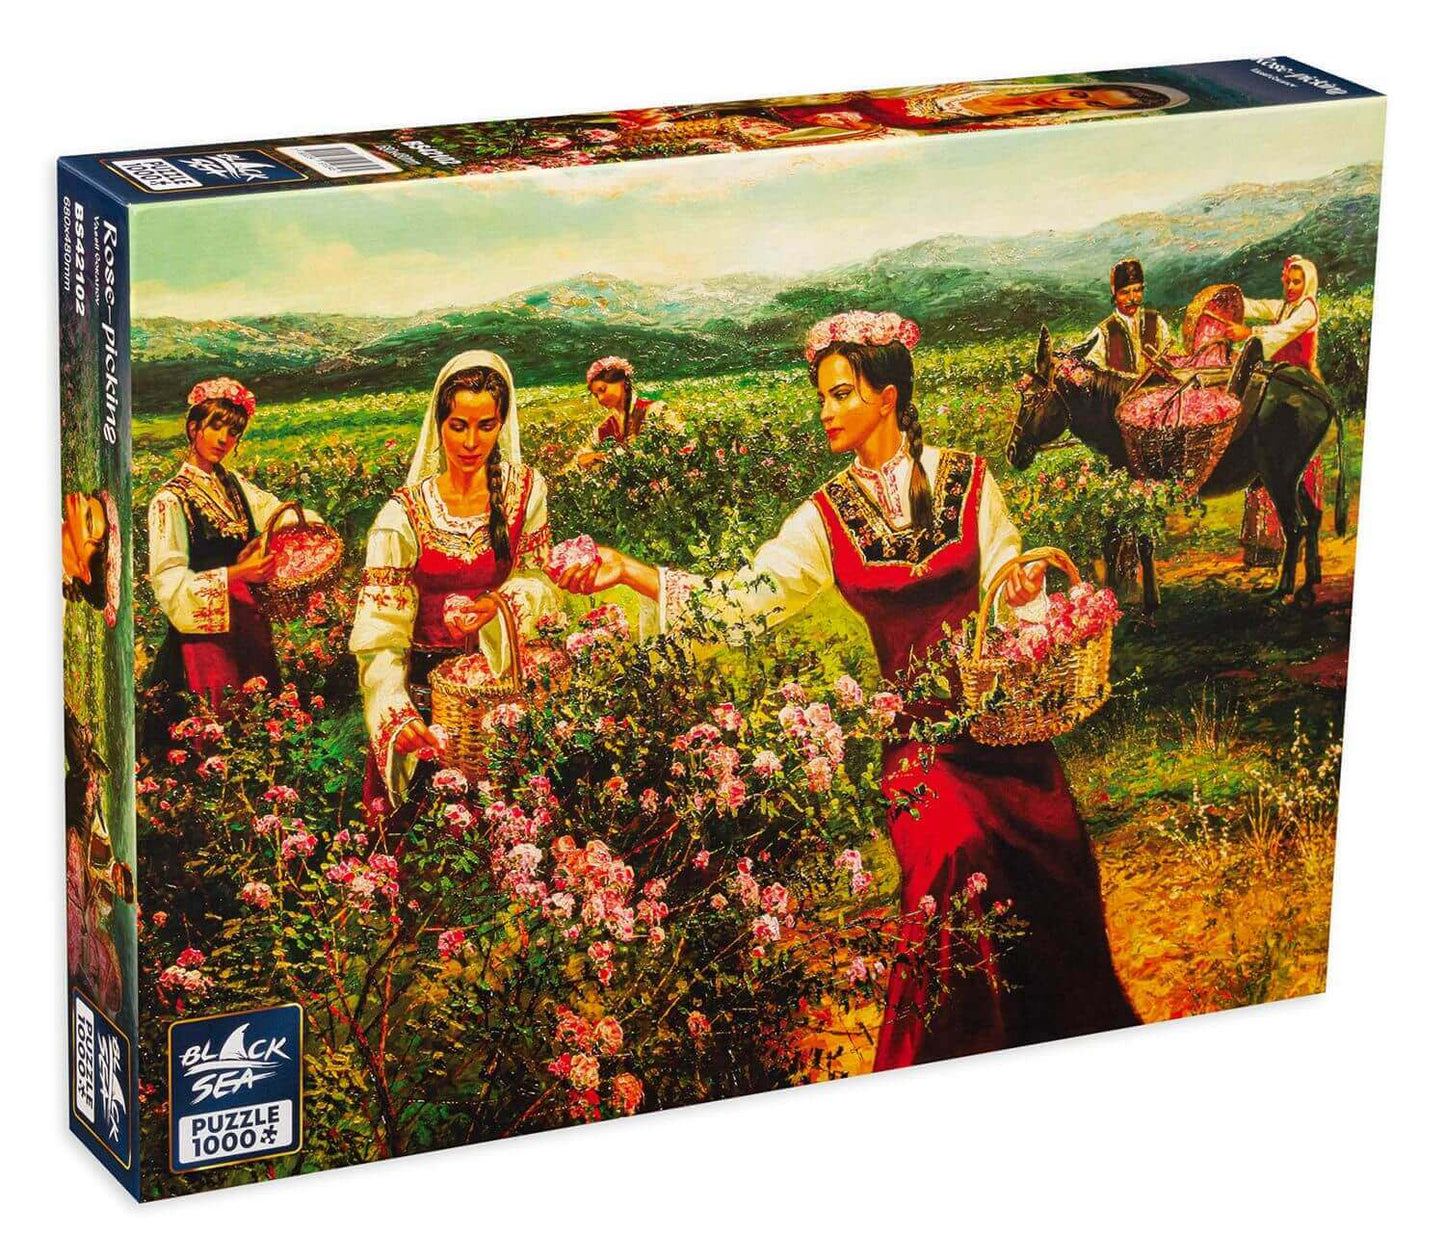 Puzzle Black Sea 1000 pieces - Rose picking, Bulgaria is blessed with magically beautiful nature and roses are one of its treasures that have earned worldwide recognition. Rose flowers are soft and tender, and their scent brings along a feeling of purity,